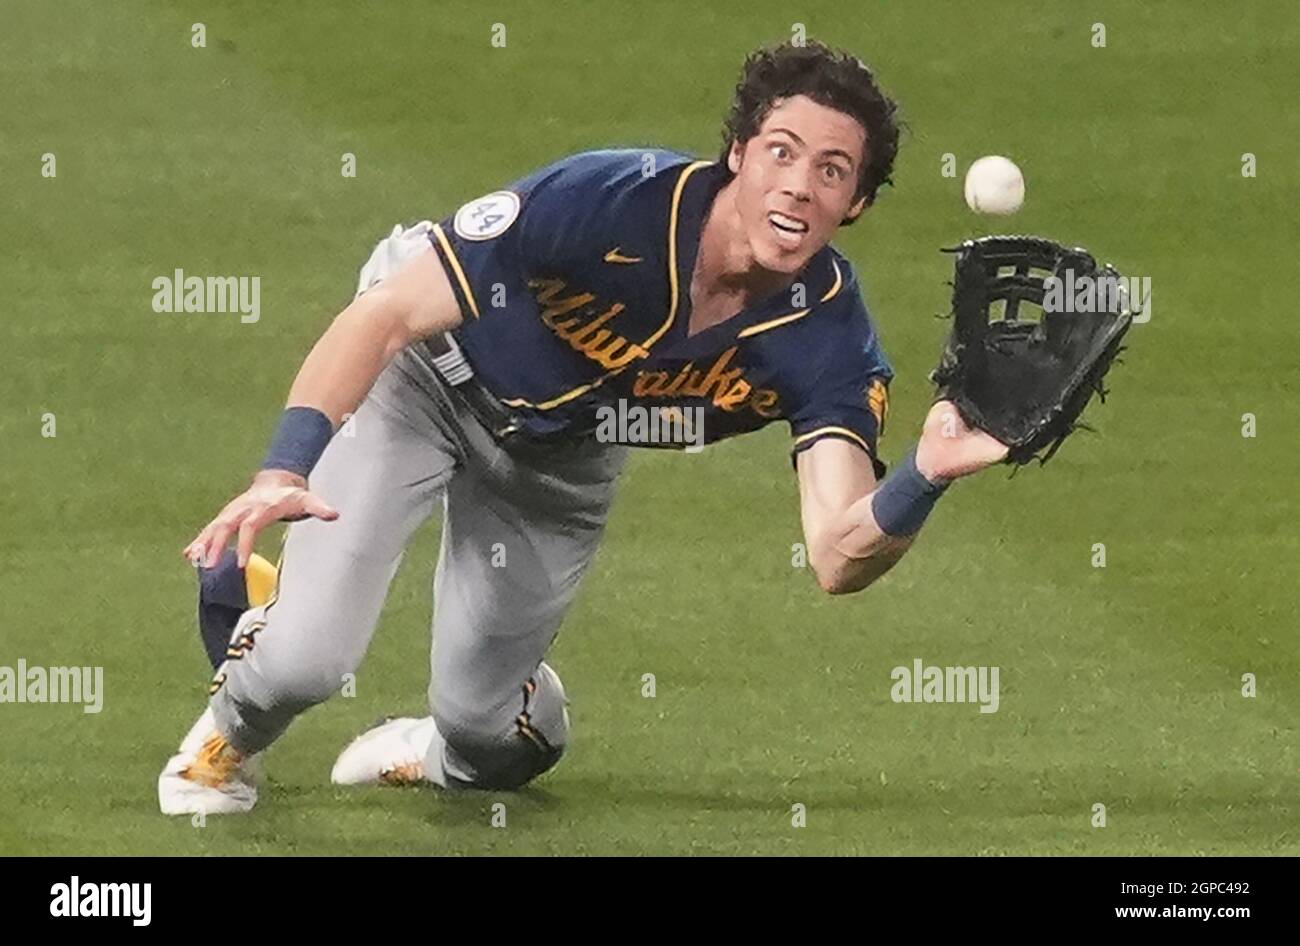 St. Louis, United States. 29th Sep, 2021. Milwaukee Brewers Christian Yelich makes a diving catch for a ball off the bat of St. Louis Cardinals Nolan Arenado in the first inning at Busch Stadium in St. Louis on Tuesday, September 28, 2021. Photo by Bill Greenblatt/UPI Credit: UPI/Alamy Live News Stock Photo